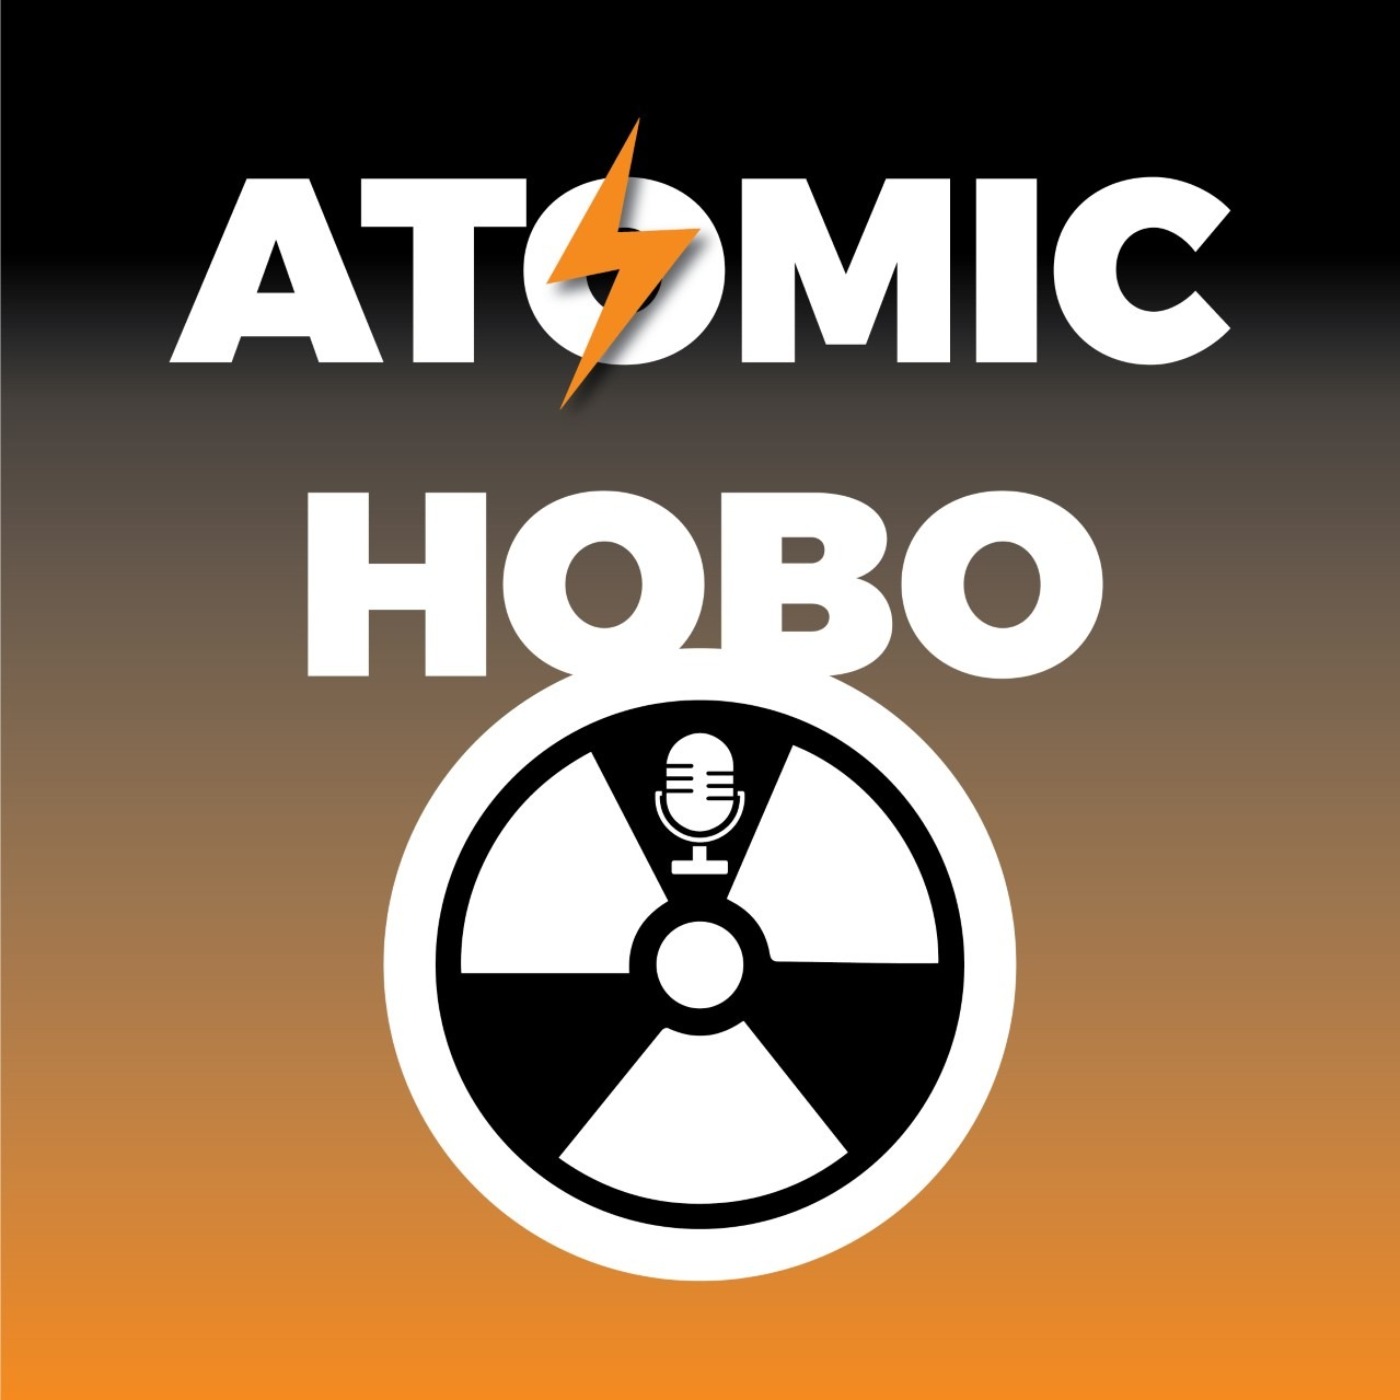 Atomic Hobo - Nuclear War Podcast podcast show image